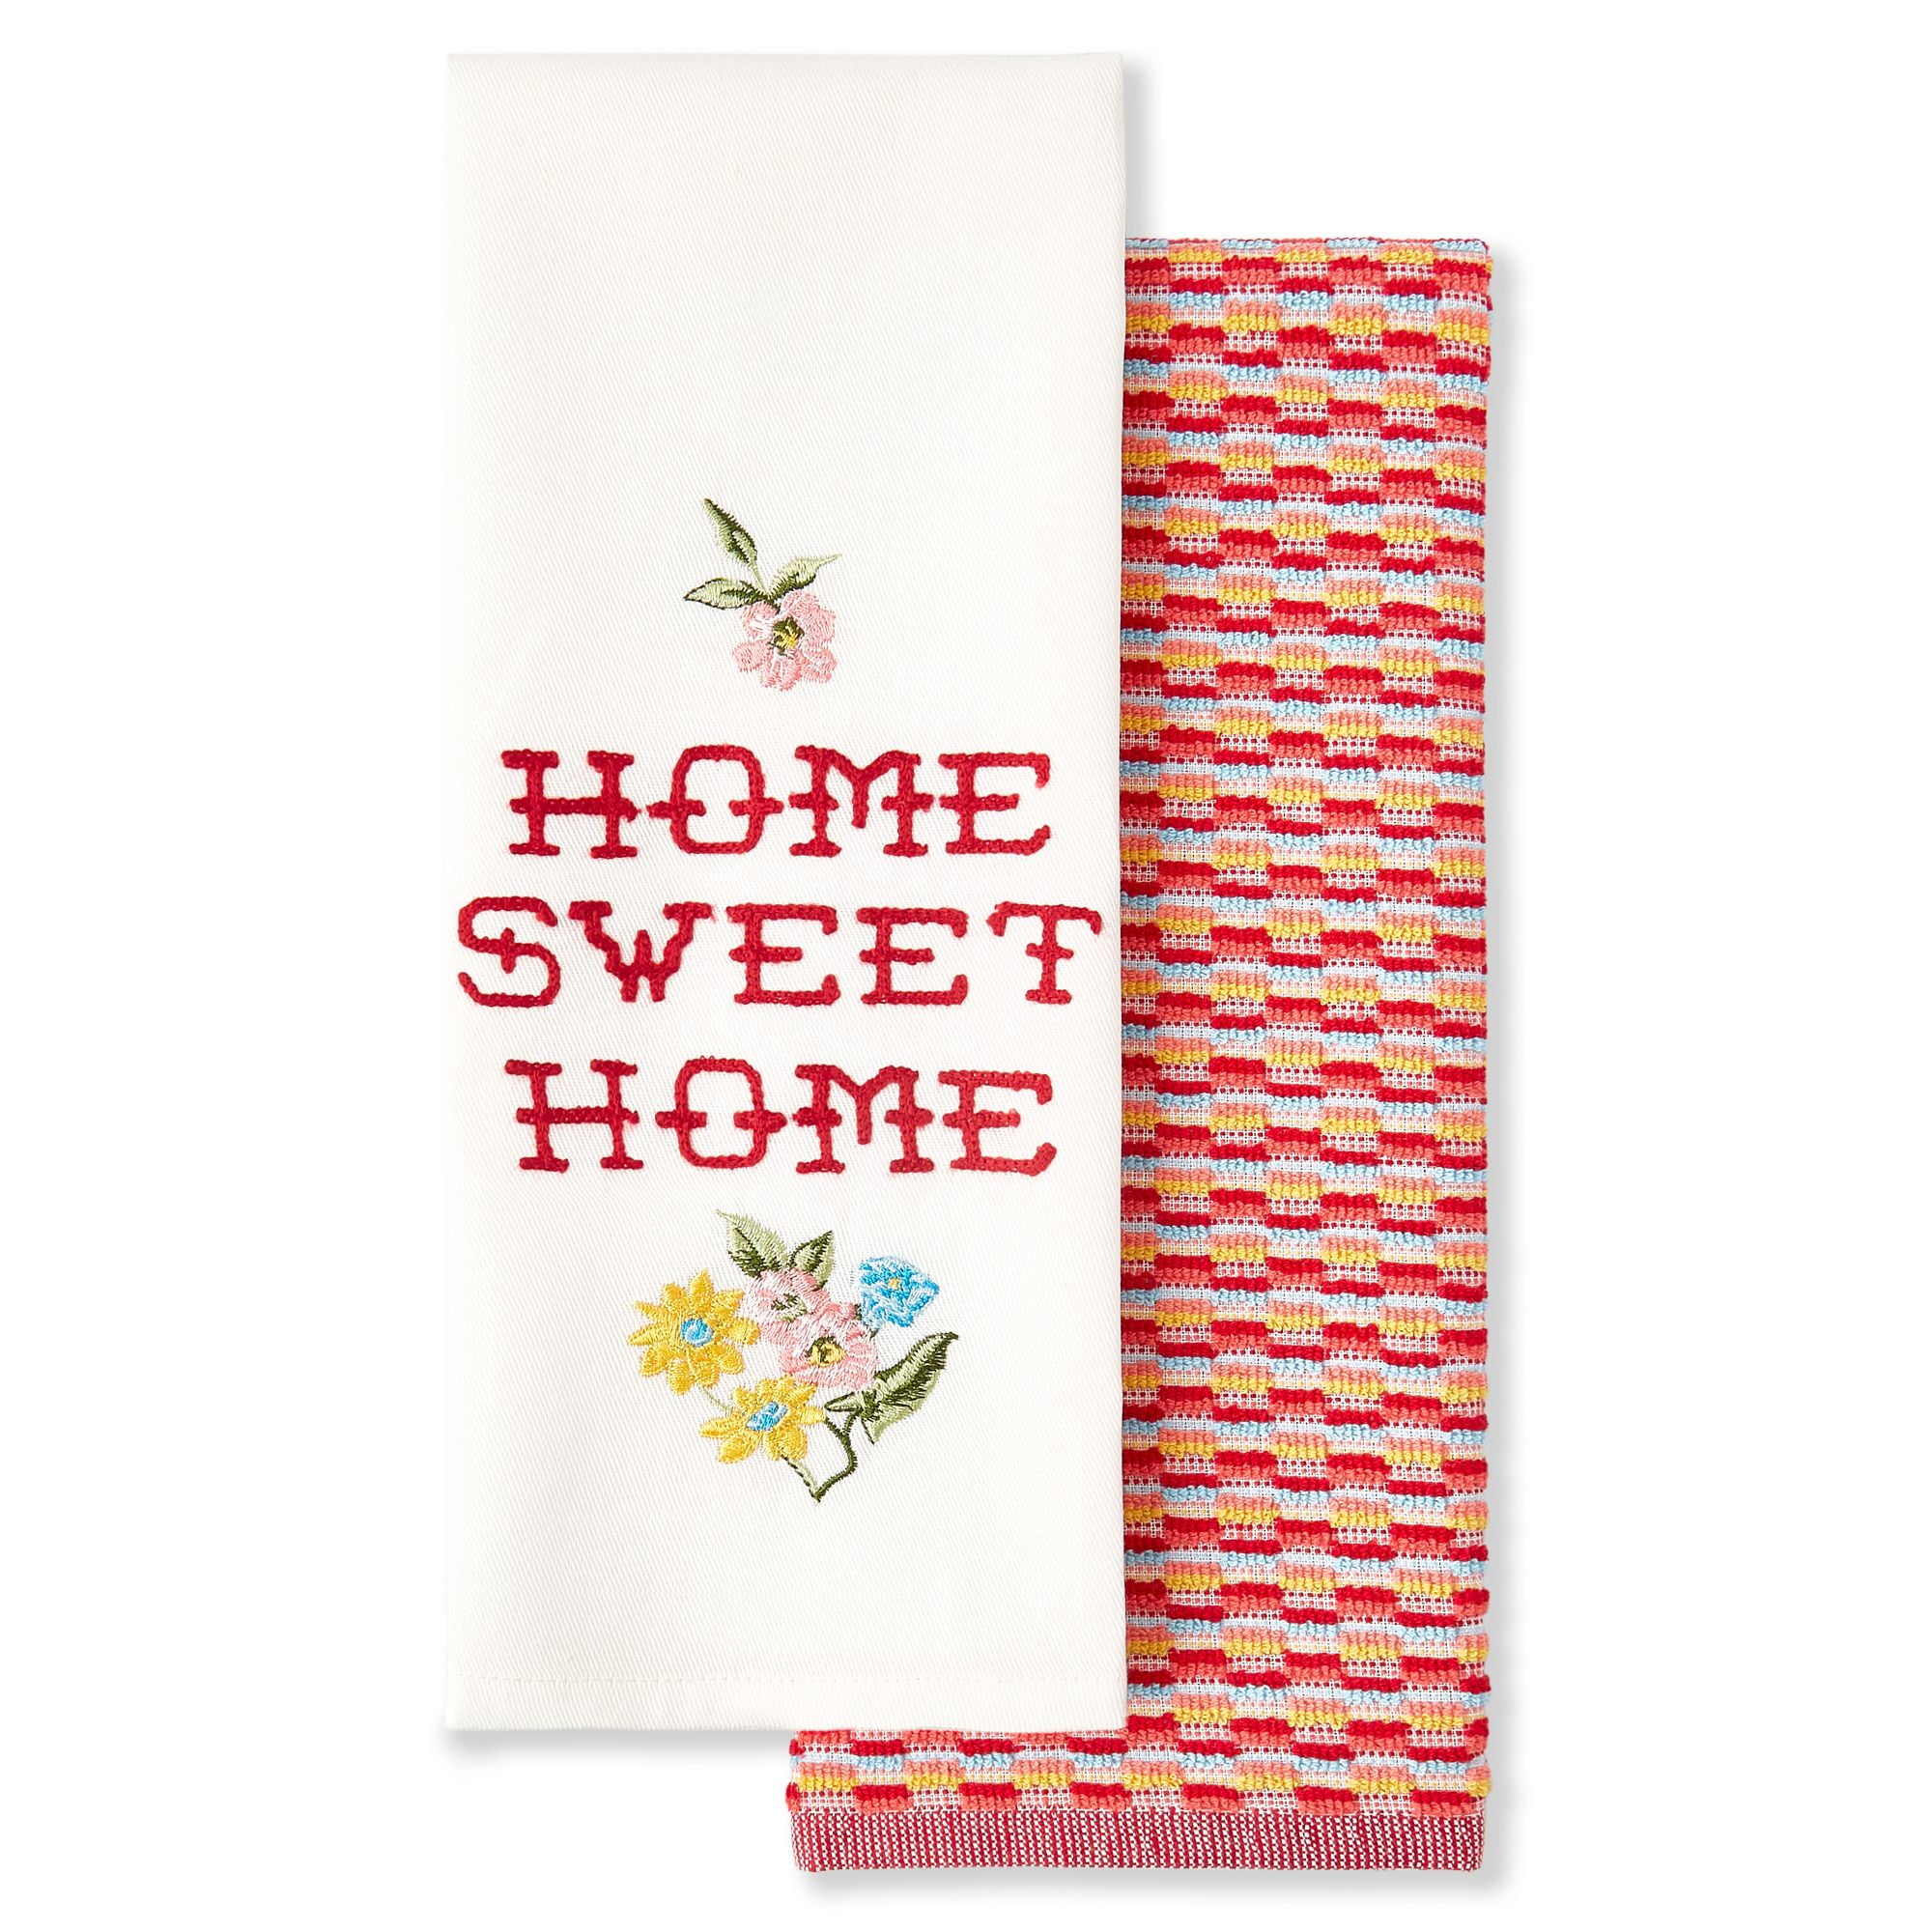 The Pioneer Woman Sweet Romance Kitchen Towel Set - Multicolor - 16 x 28 in